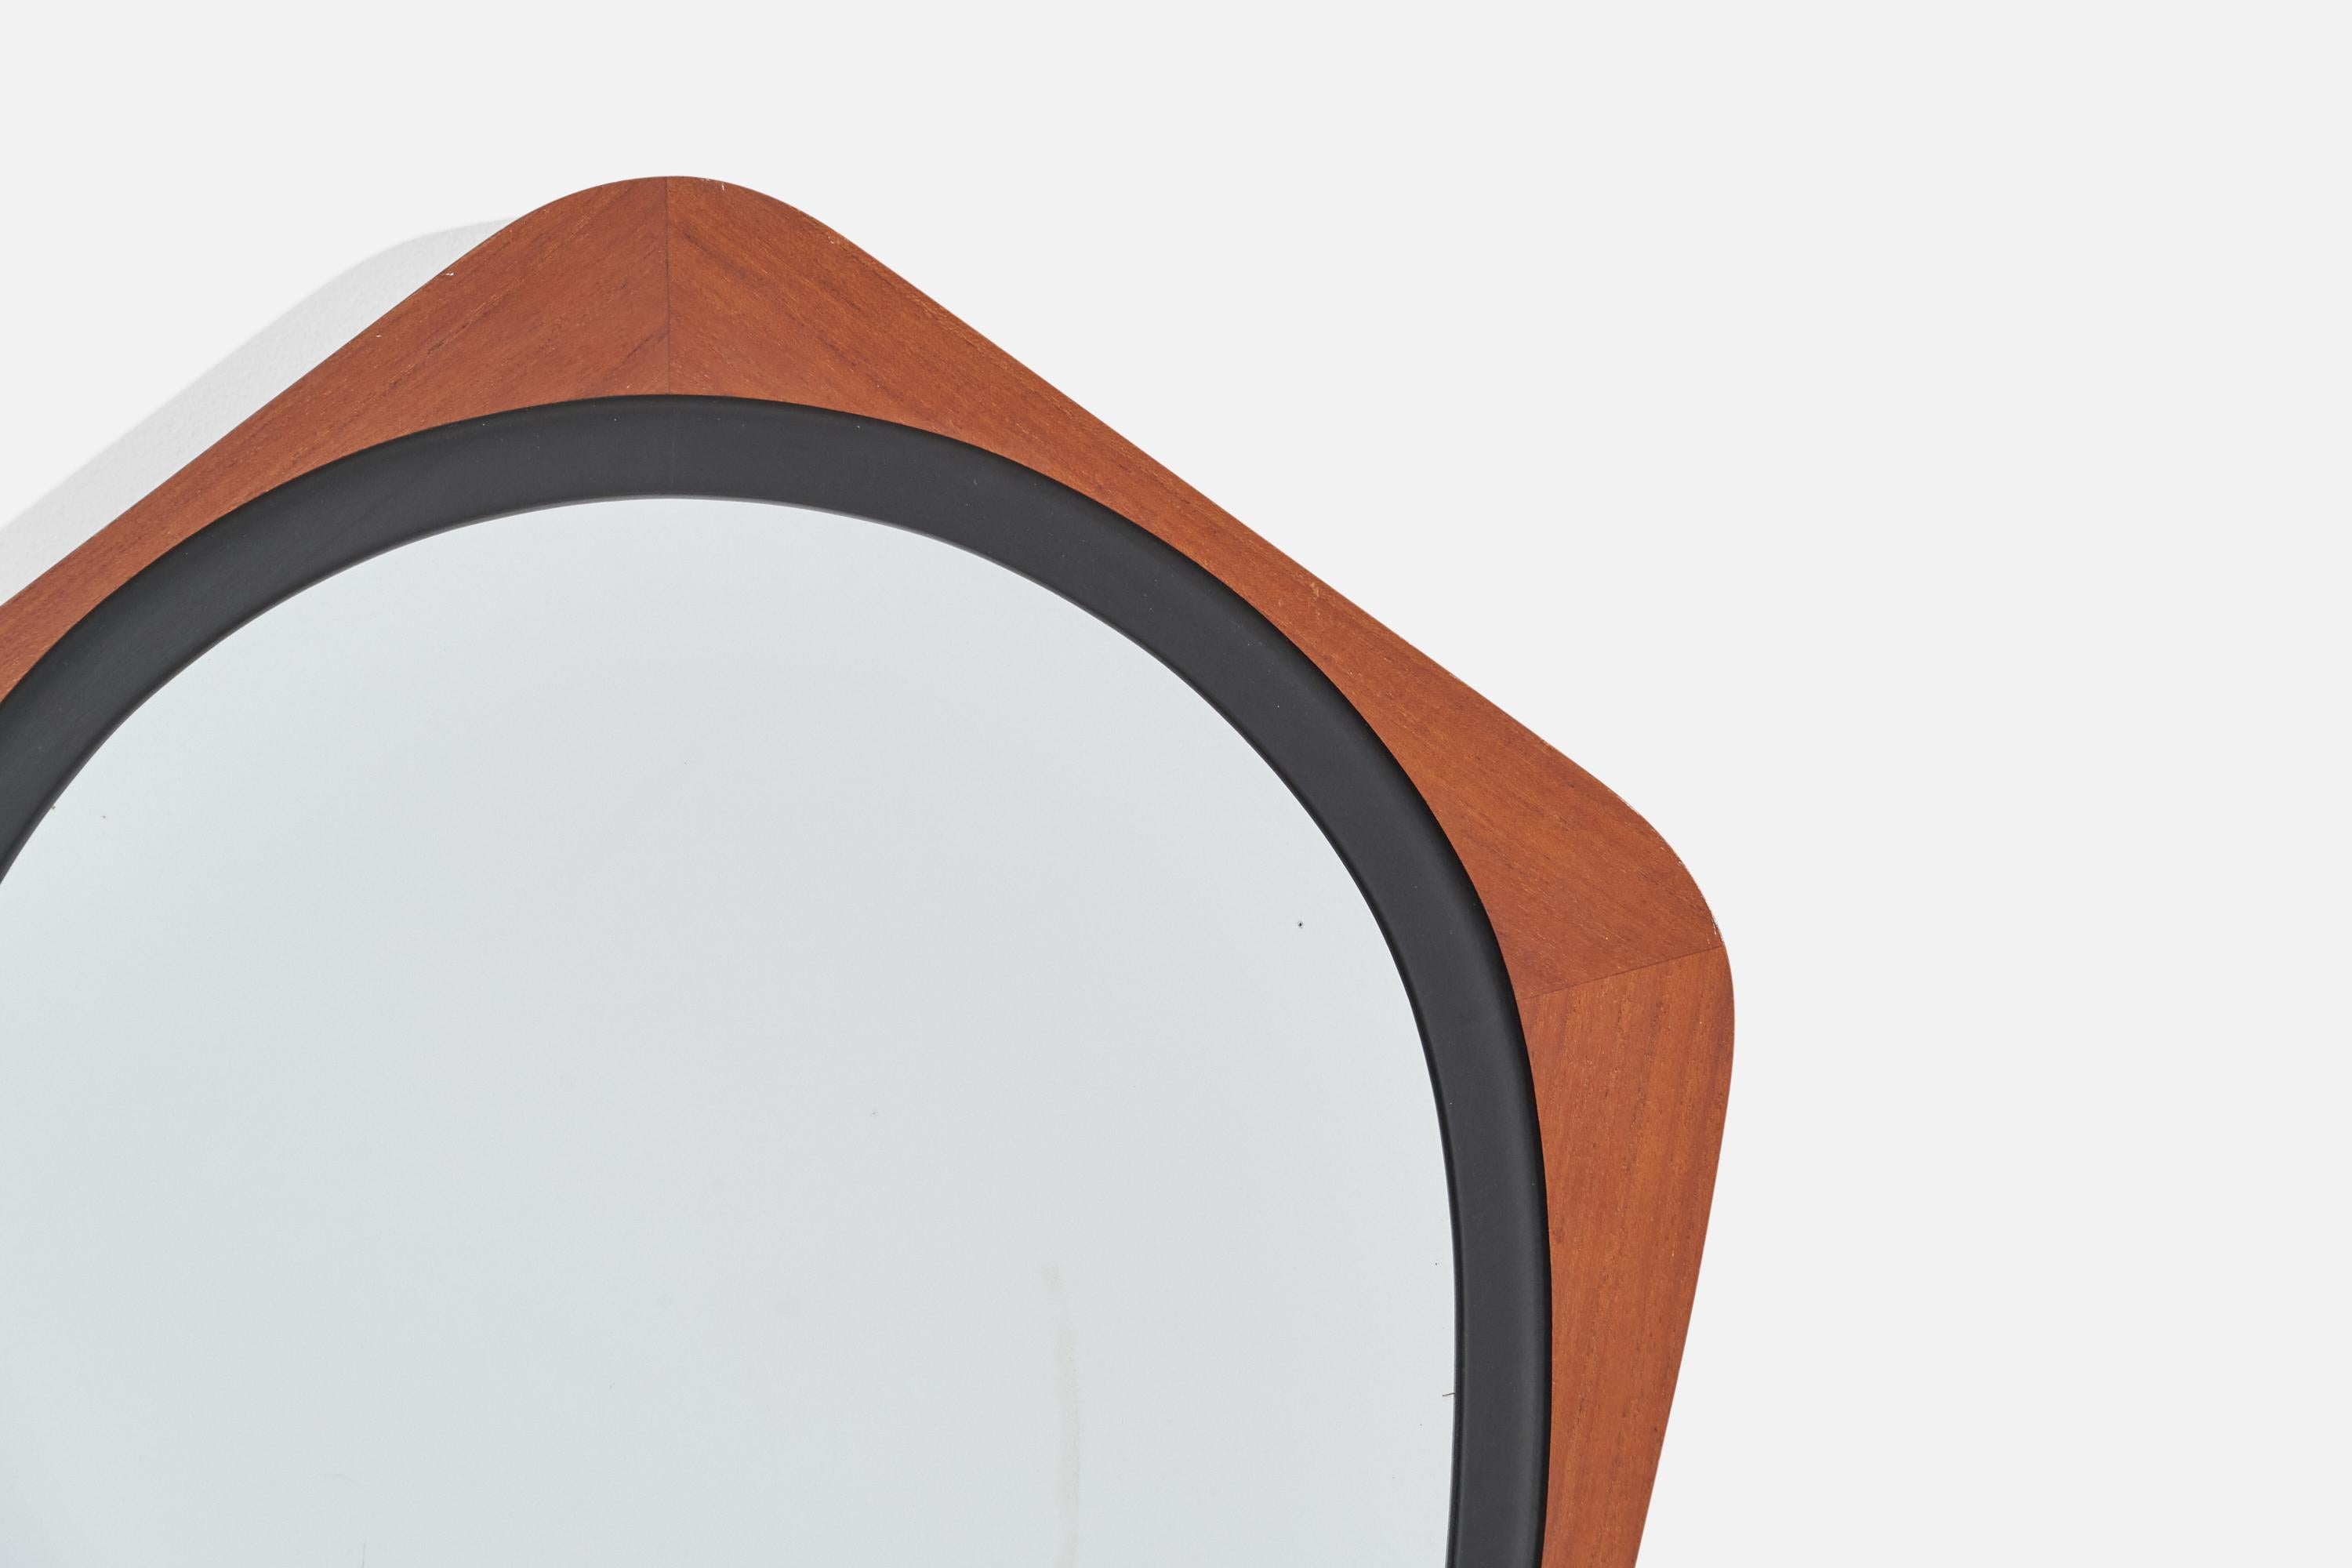 Mid-20th Century Glas & Trä, Wall Mirror, Rosewood, Black-Painted Wood, Hovmantorp, Sweden, 1950s For Sale